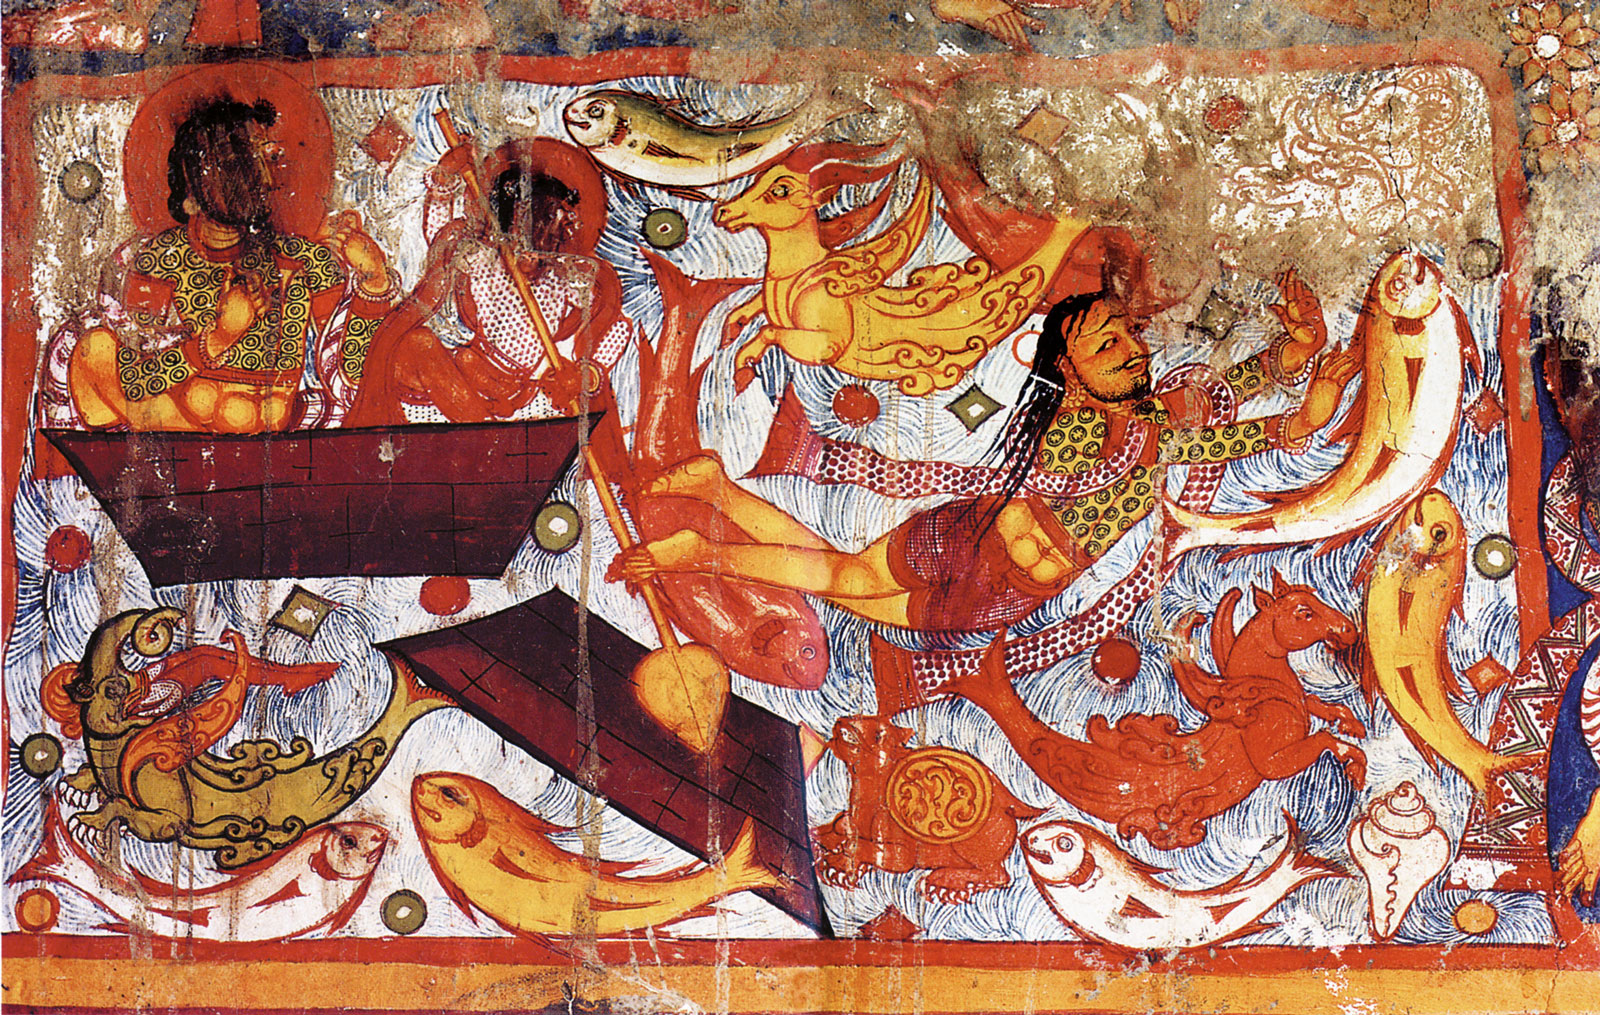 Avalokiteshvara painting of a fisherman in distress during a storm, in the northeast stupa of the Mother Monastery in Tholing, Kashmiri origin, possibly of the foundation period